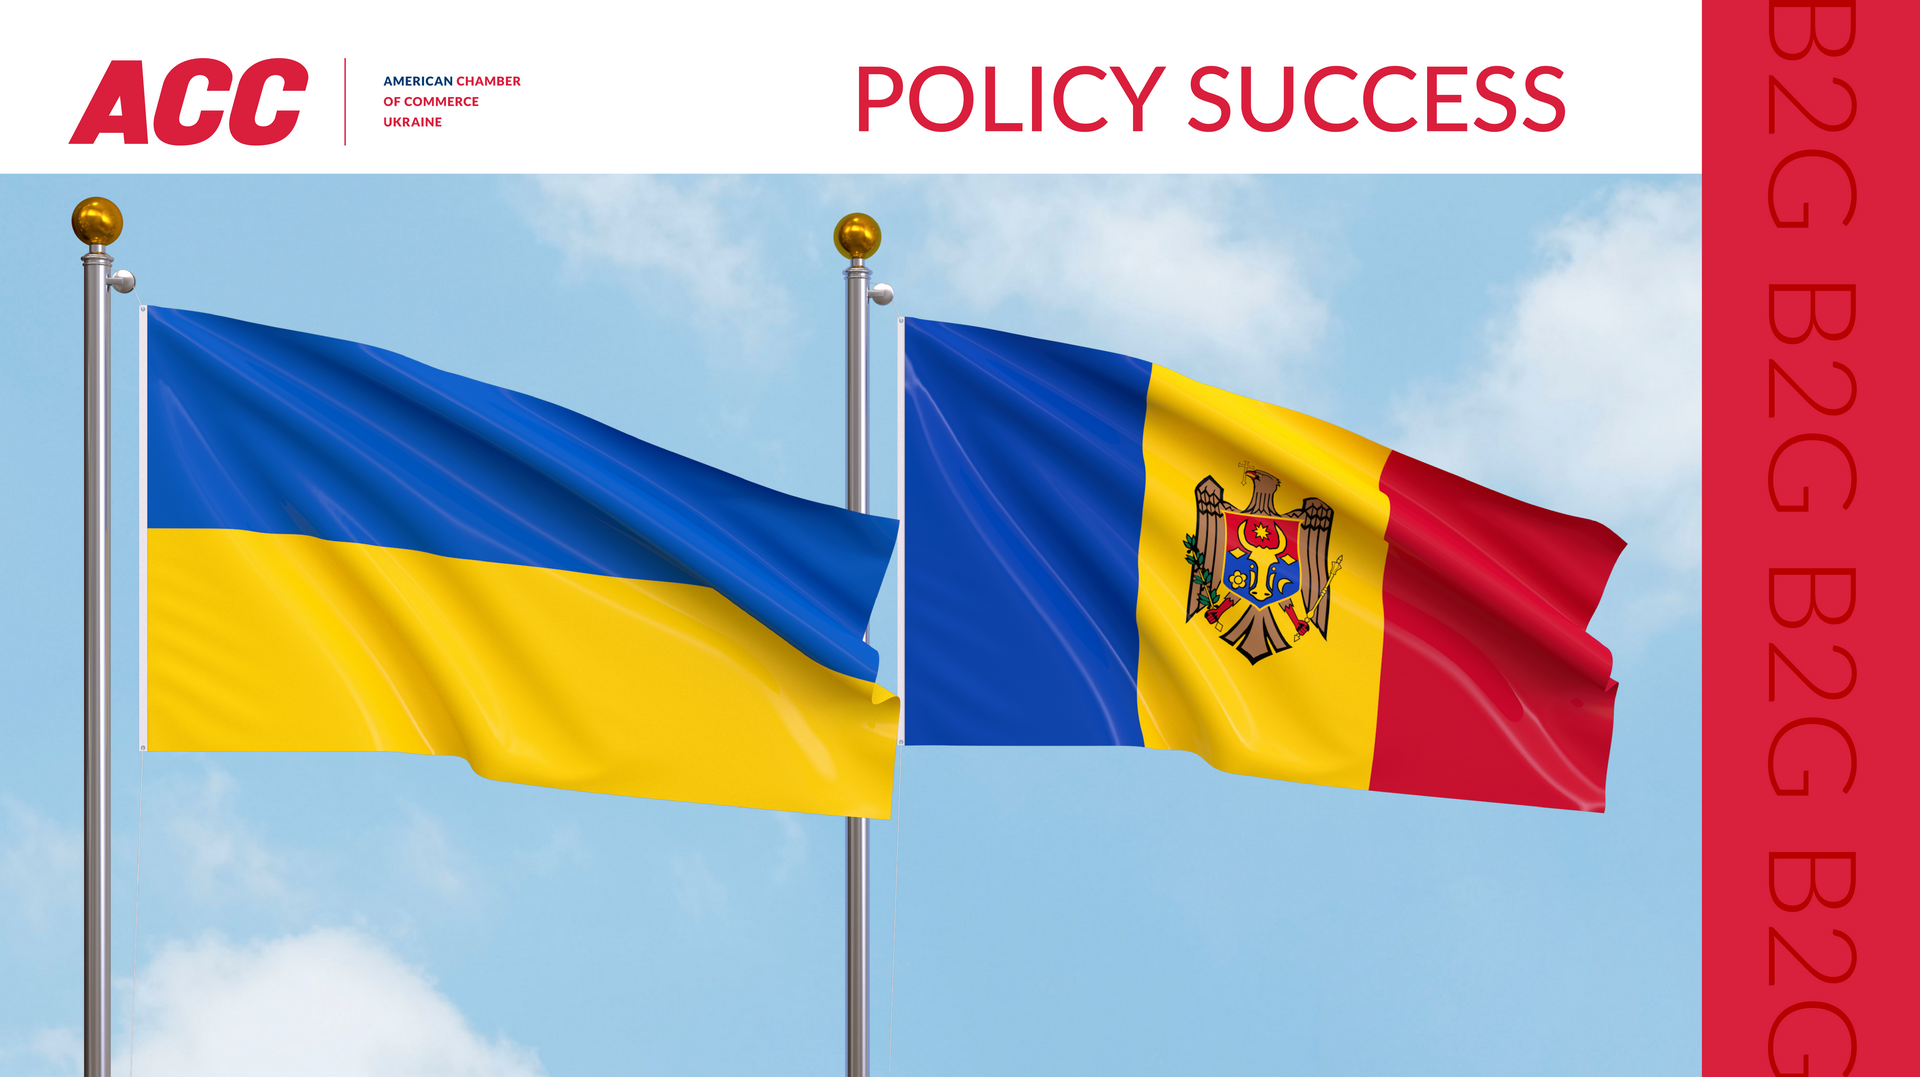 Policy Win: Conditions for Access of Ukrainian Goods to the Moldovan Market Have Been Improved